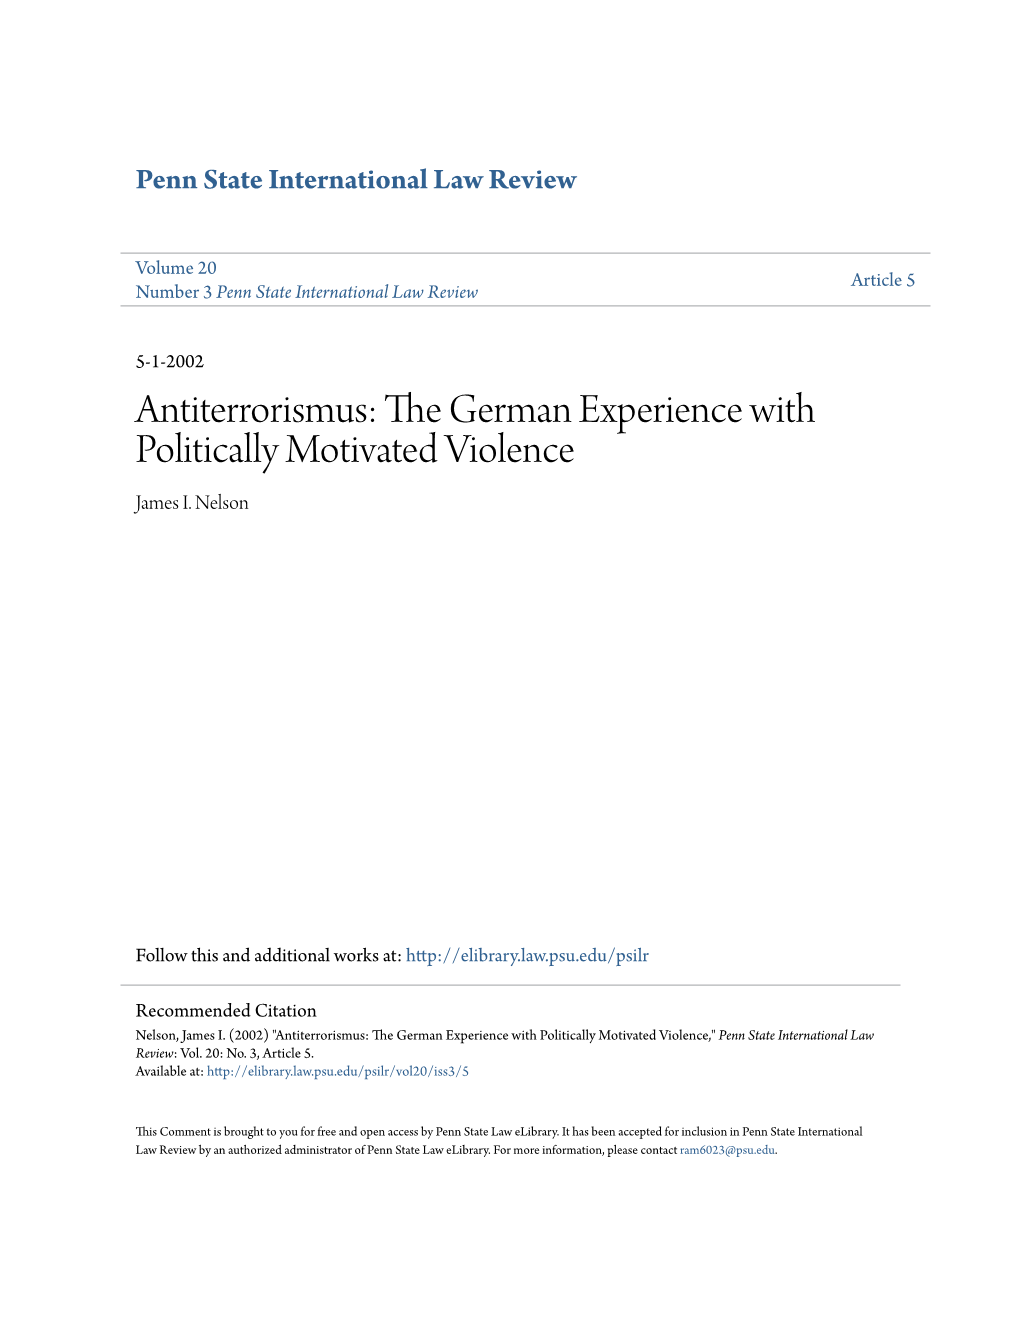 The German Experience with Politically Motivated Violence James I